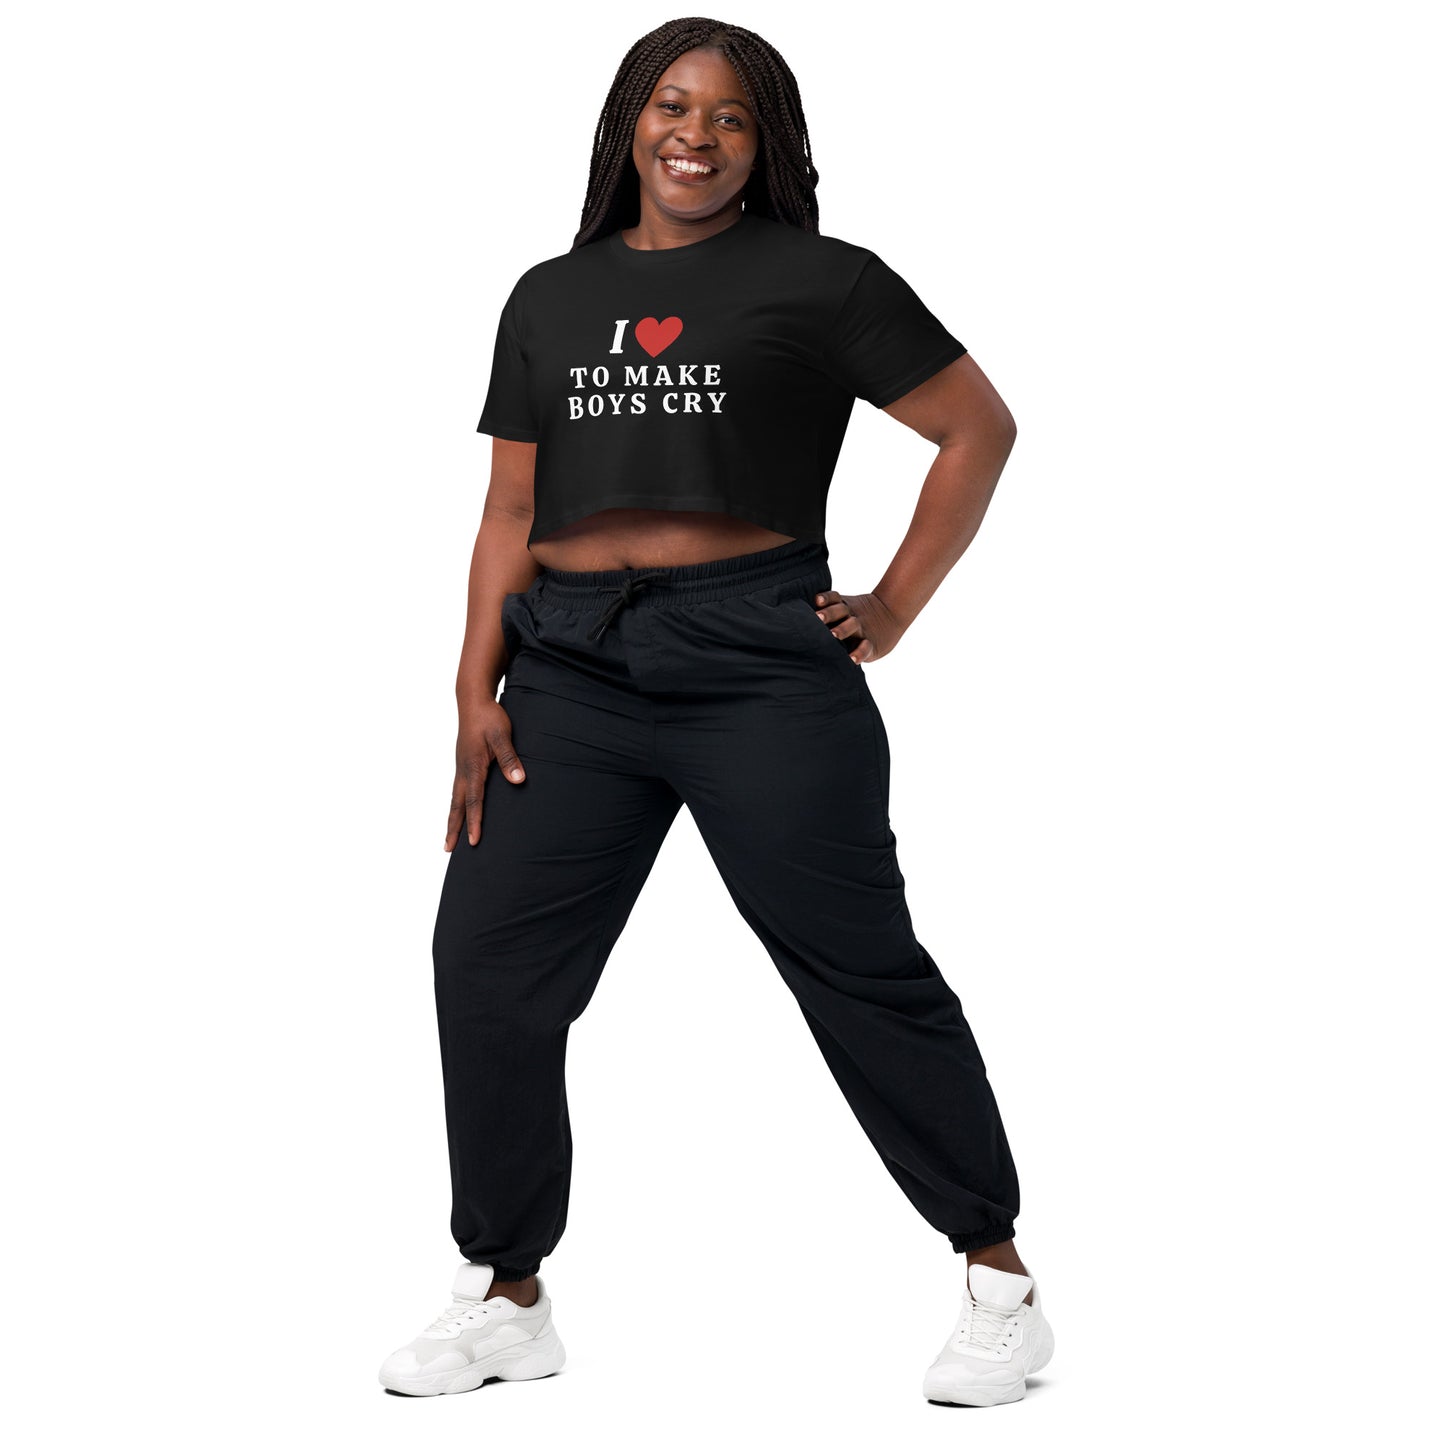 I Love To Make Boys Cry Women’s Crop Top